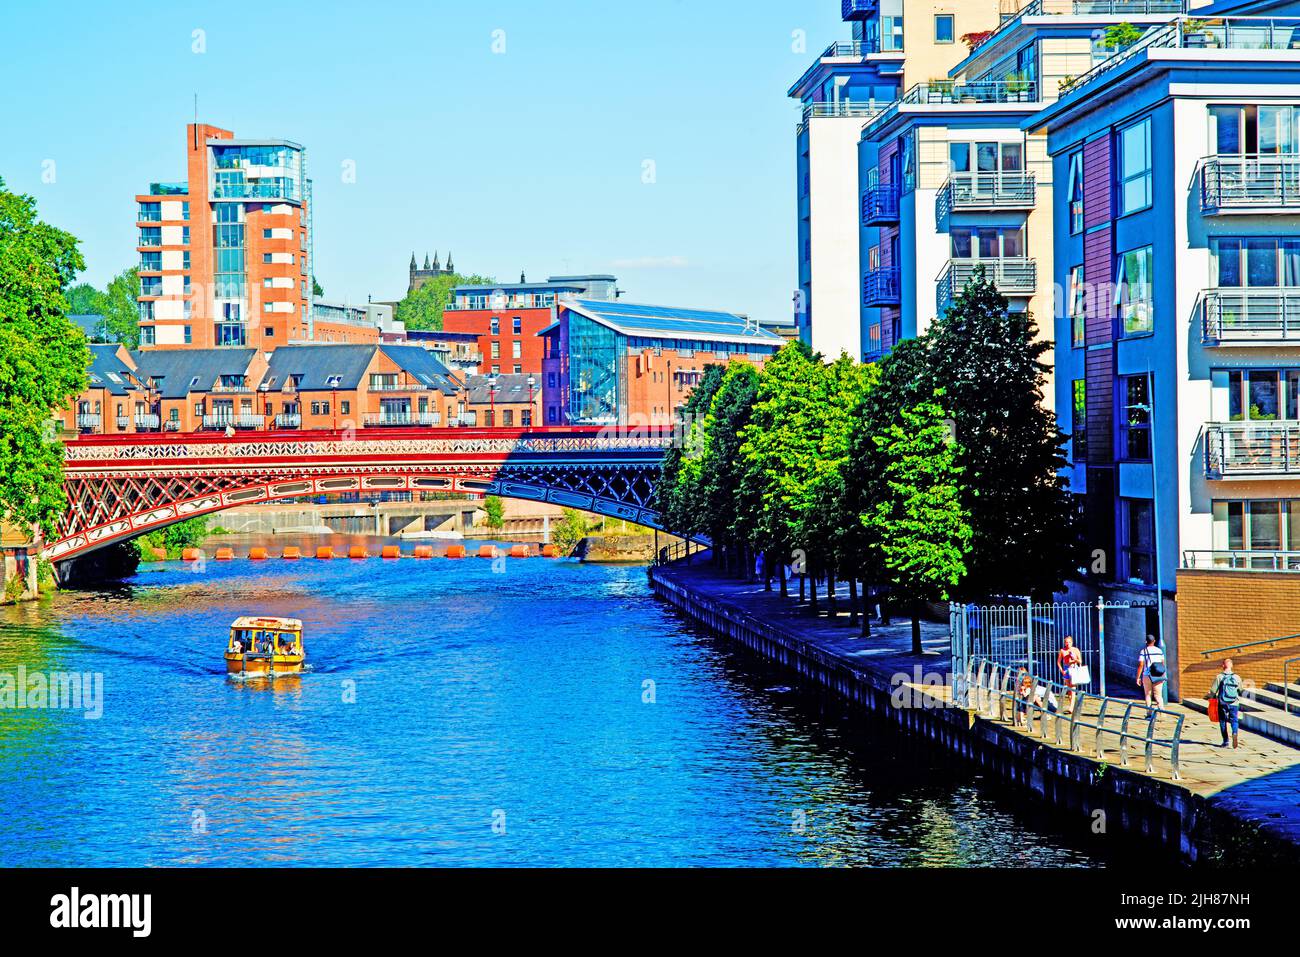 River Aire and Crown Point Bridge Leeds, England Stock Photo